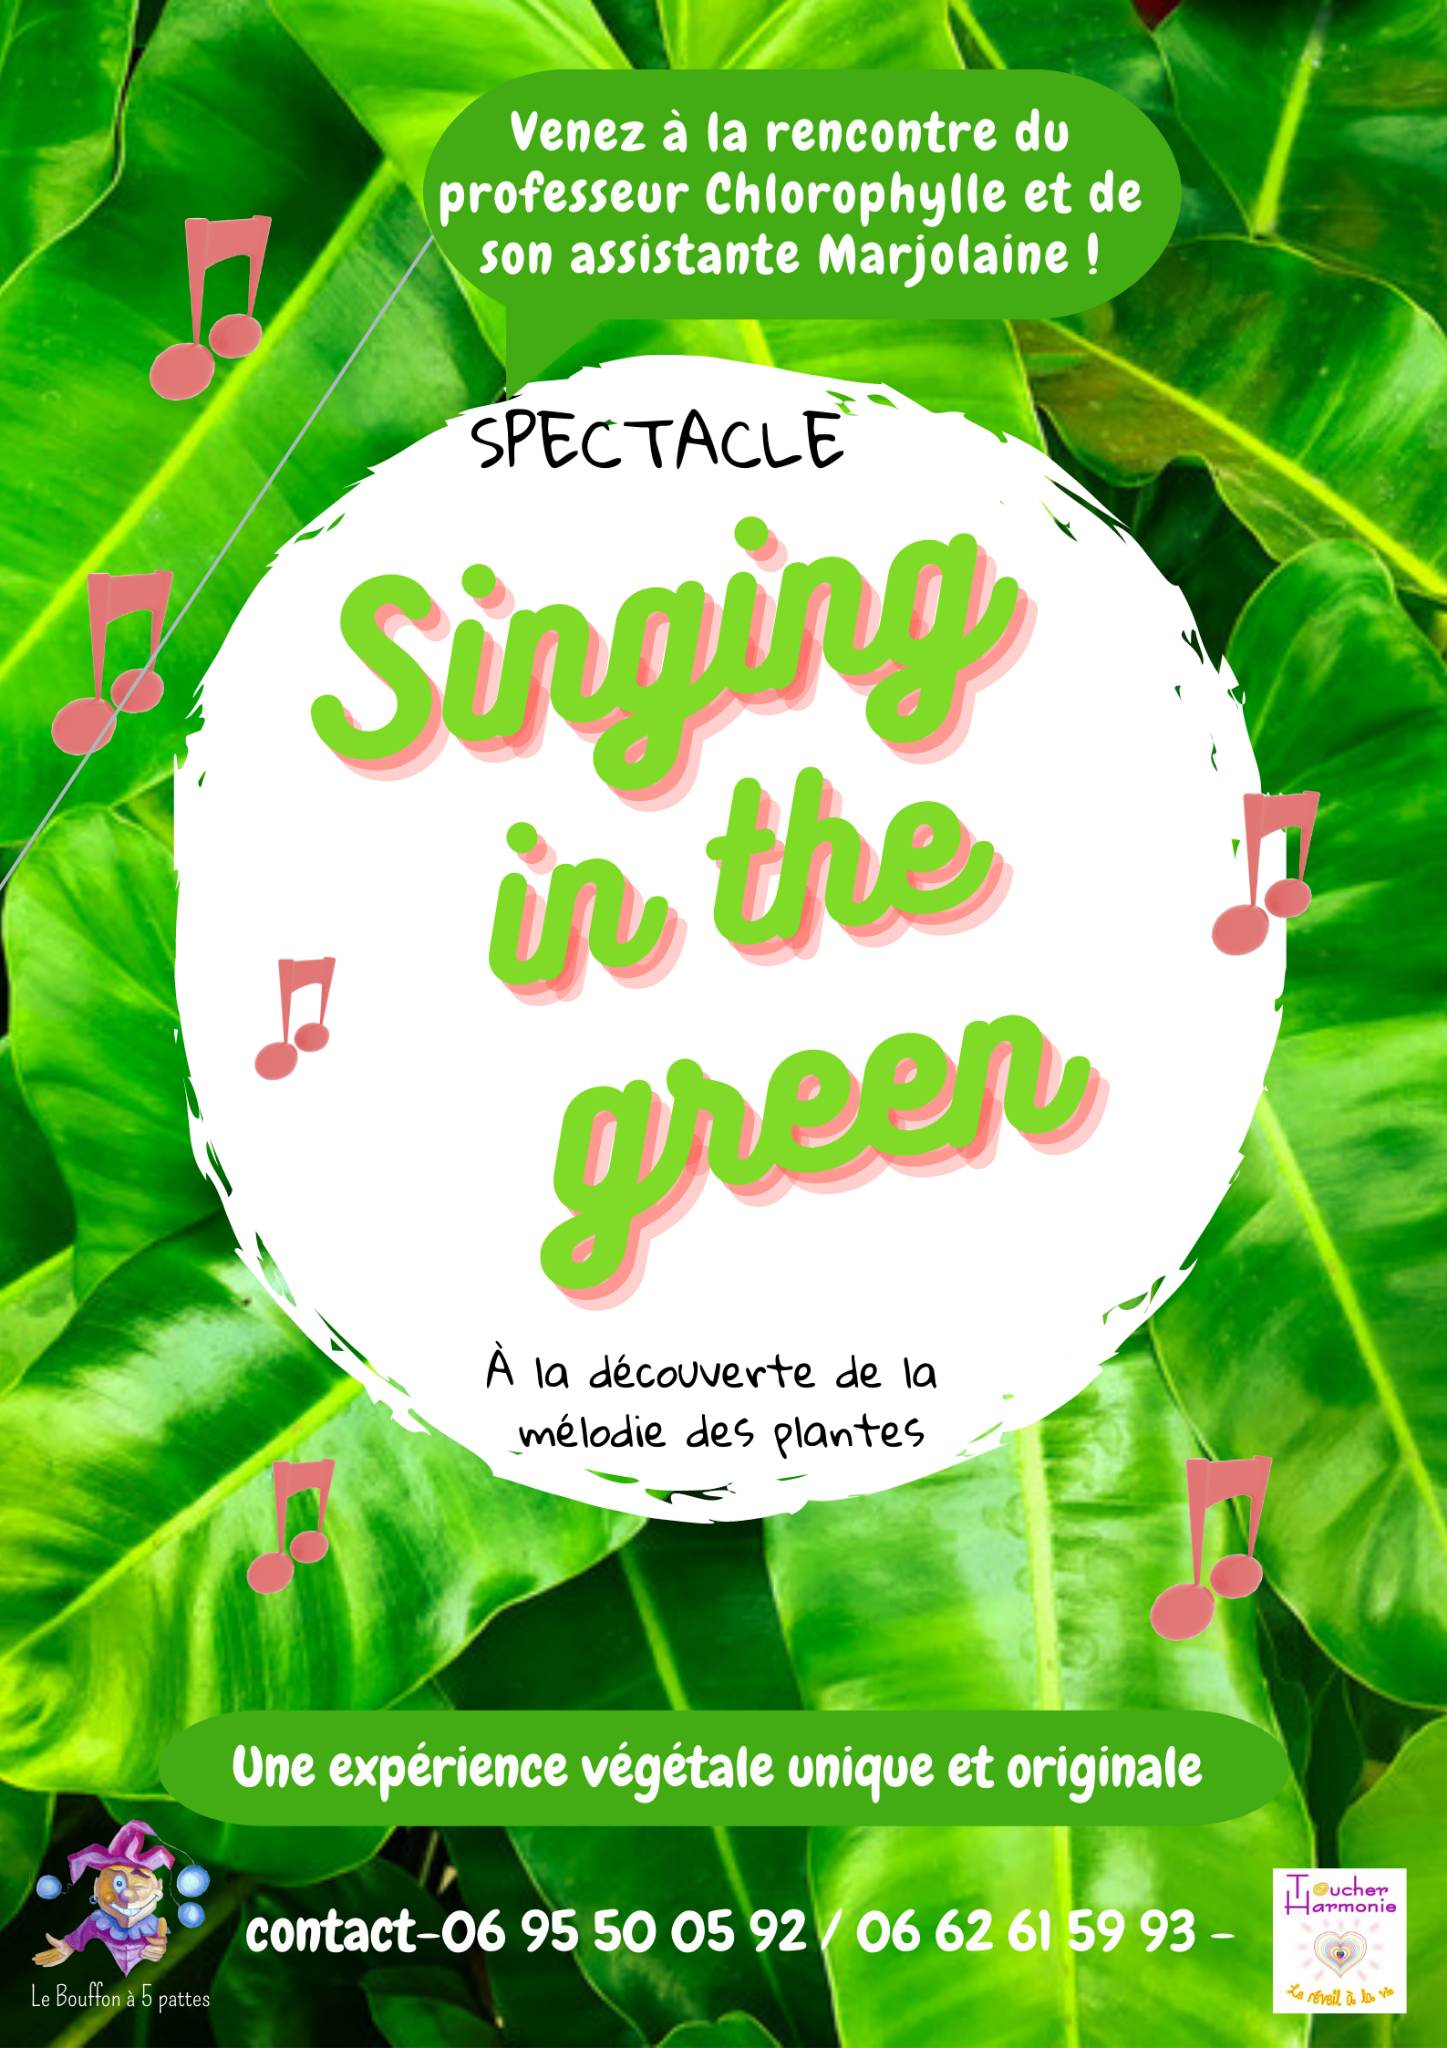 You are currently viewing Spectacle Singing in the green